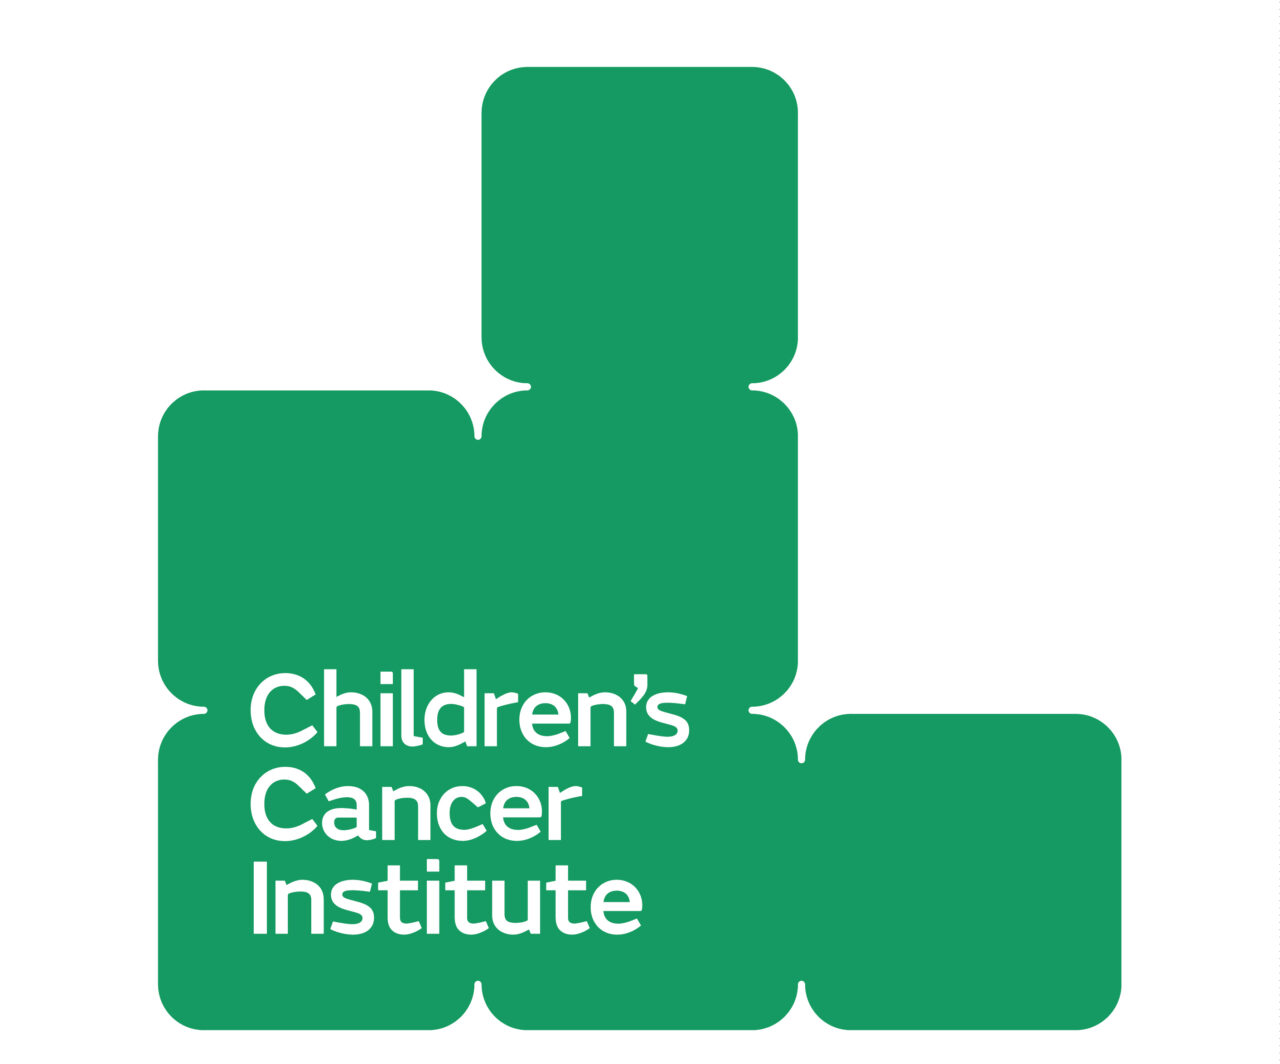 Children’s Cancer Institute is looking for an expert to join as Strategy and Government Relations Lead